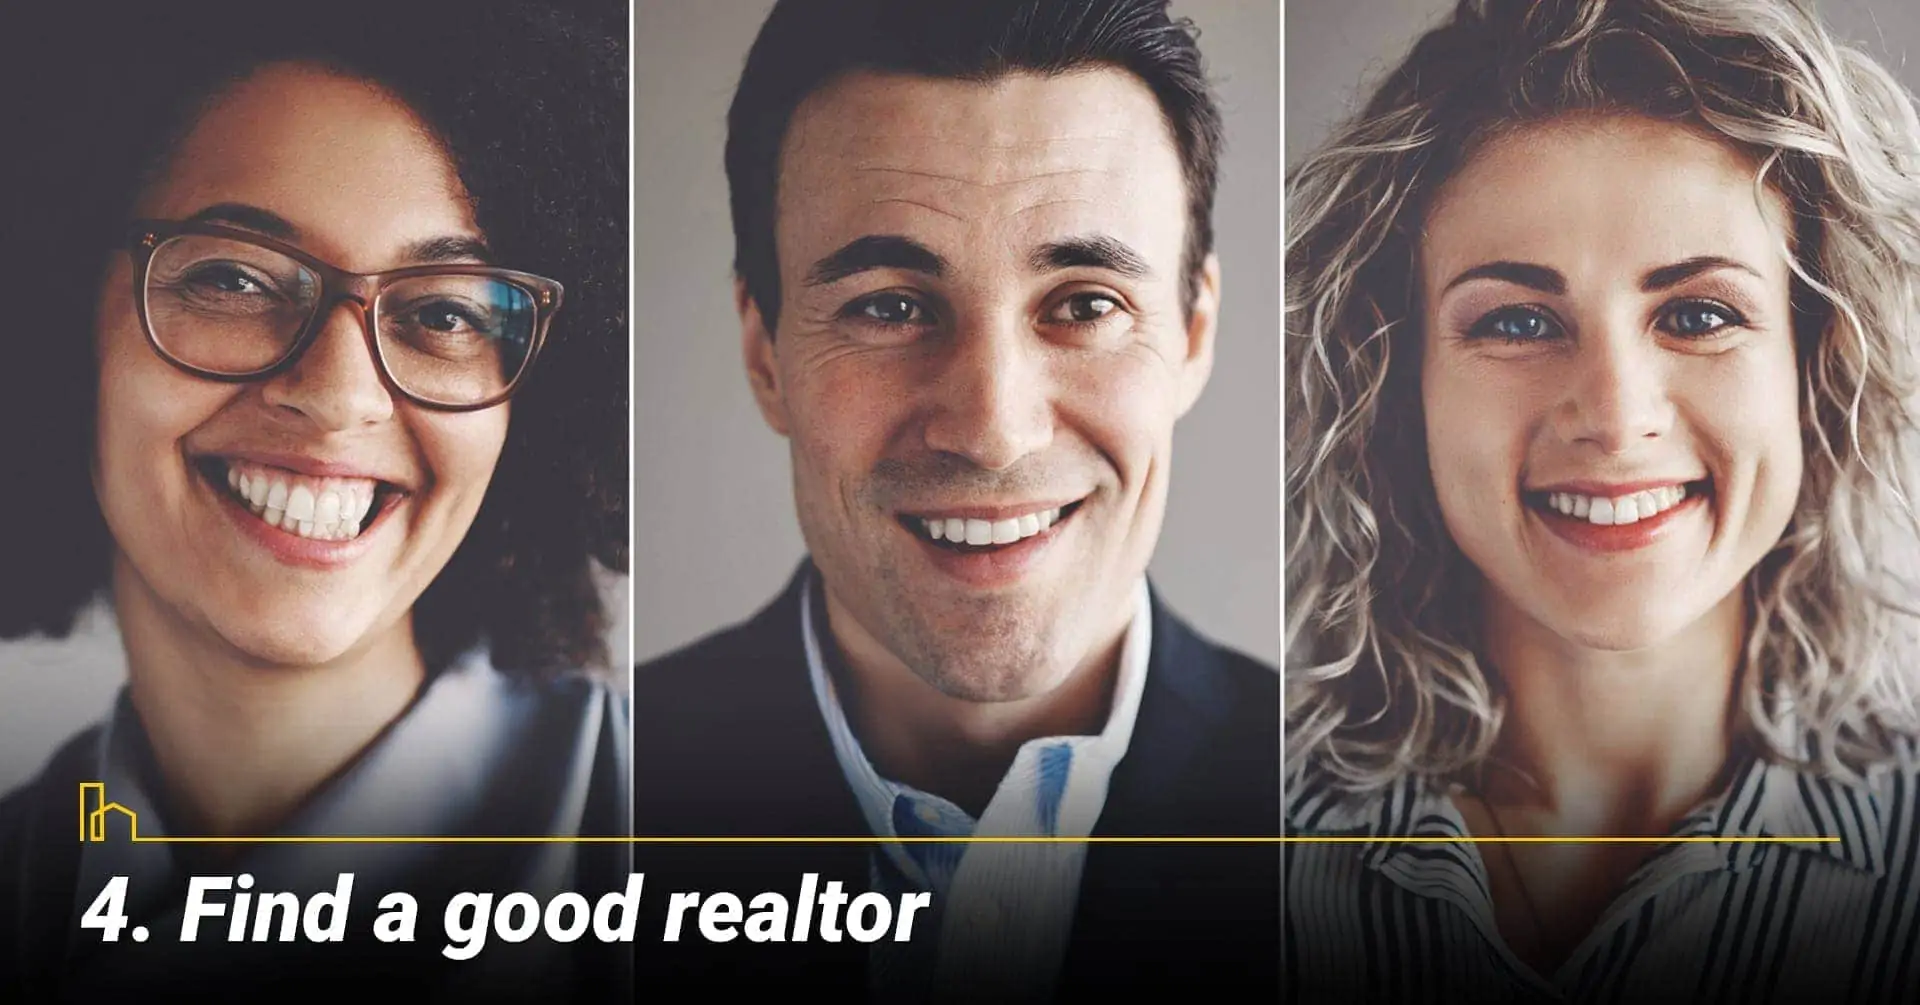 Find a good realtor, look for an experienced realtor